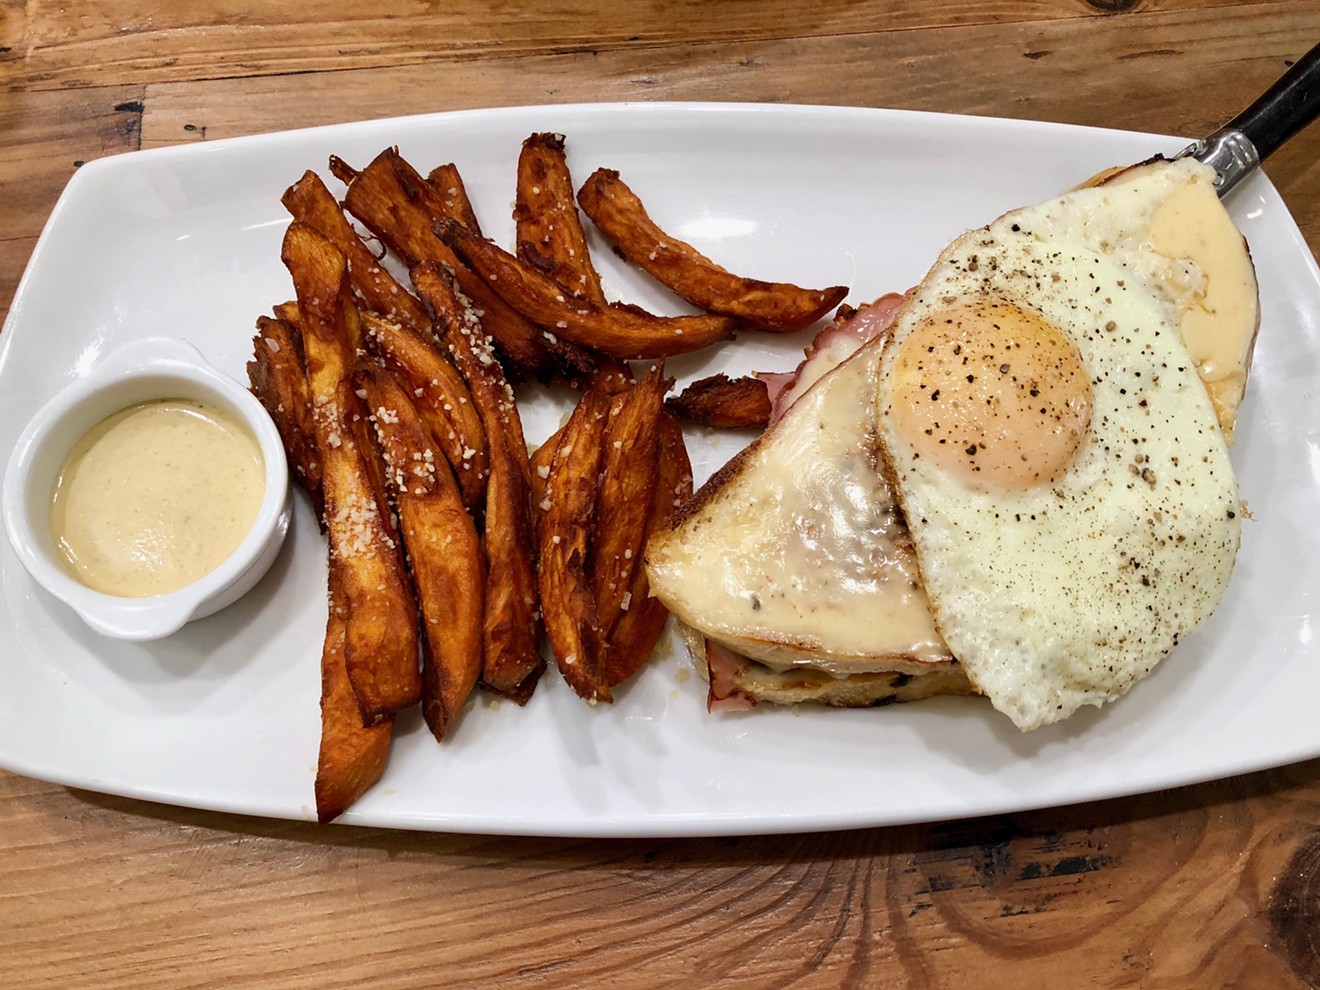 The croque madame at Edith's French Bistro